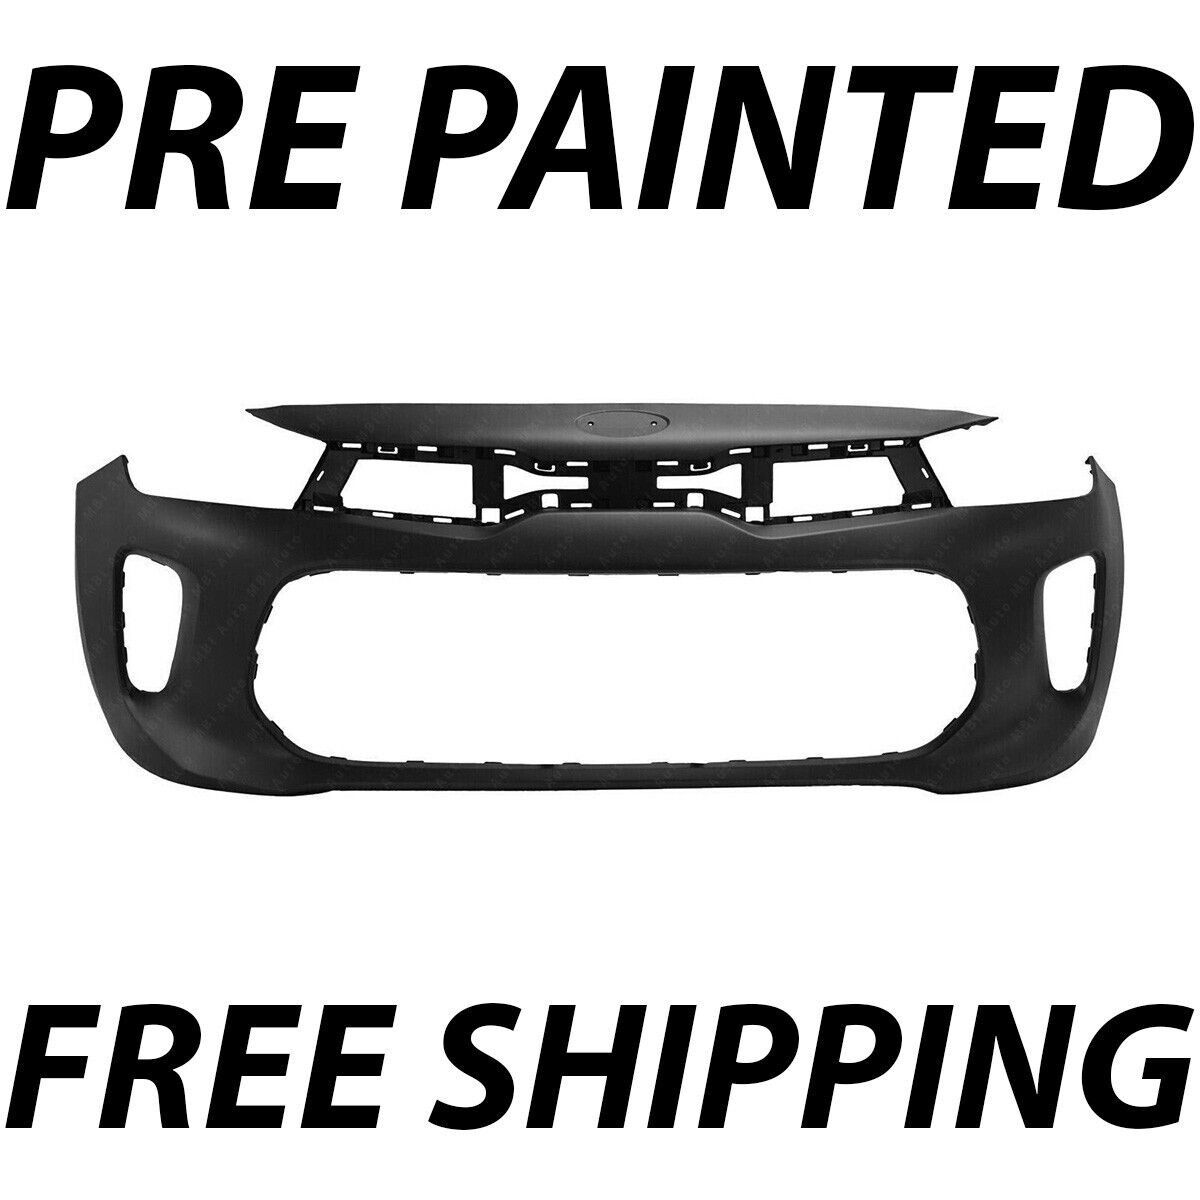 NEW Painted To Match - Front Bumper Cover Replacement for 2018 2019 2020 Kia Rio